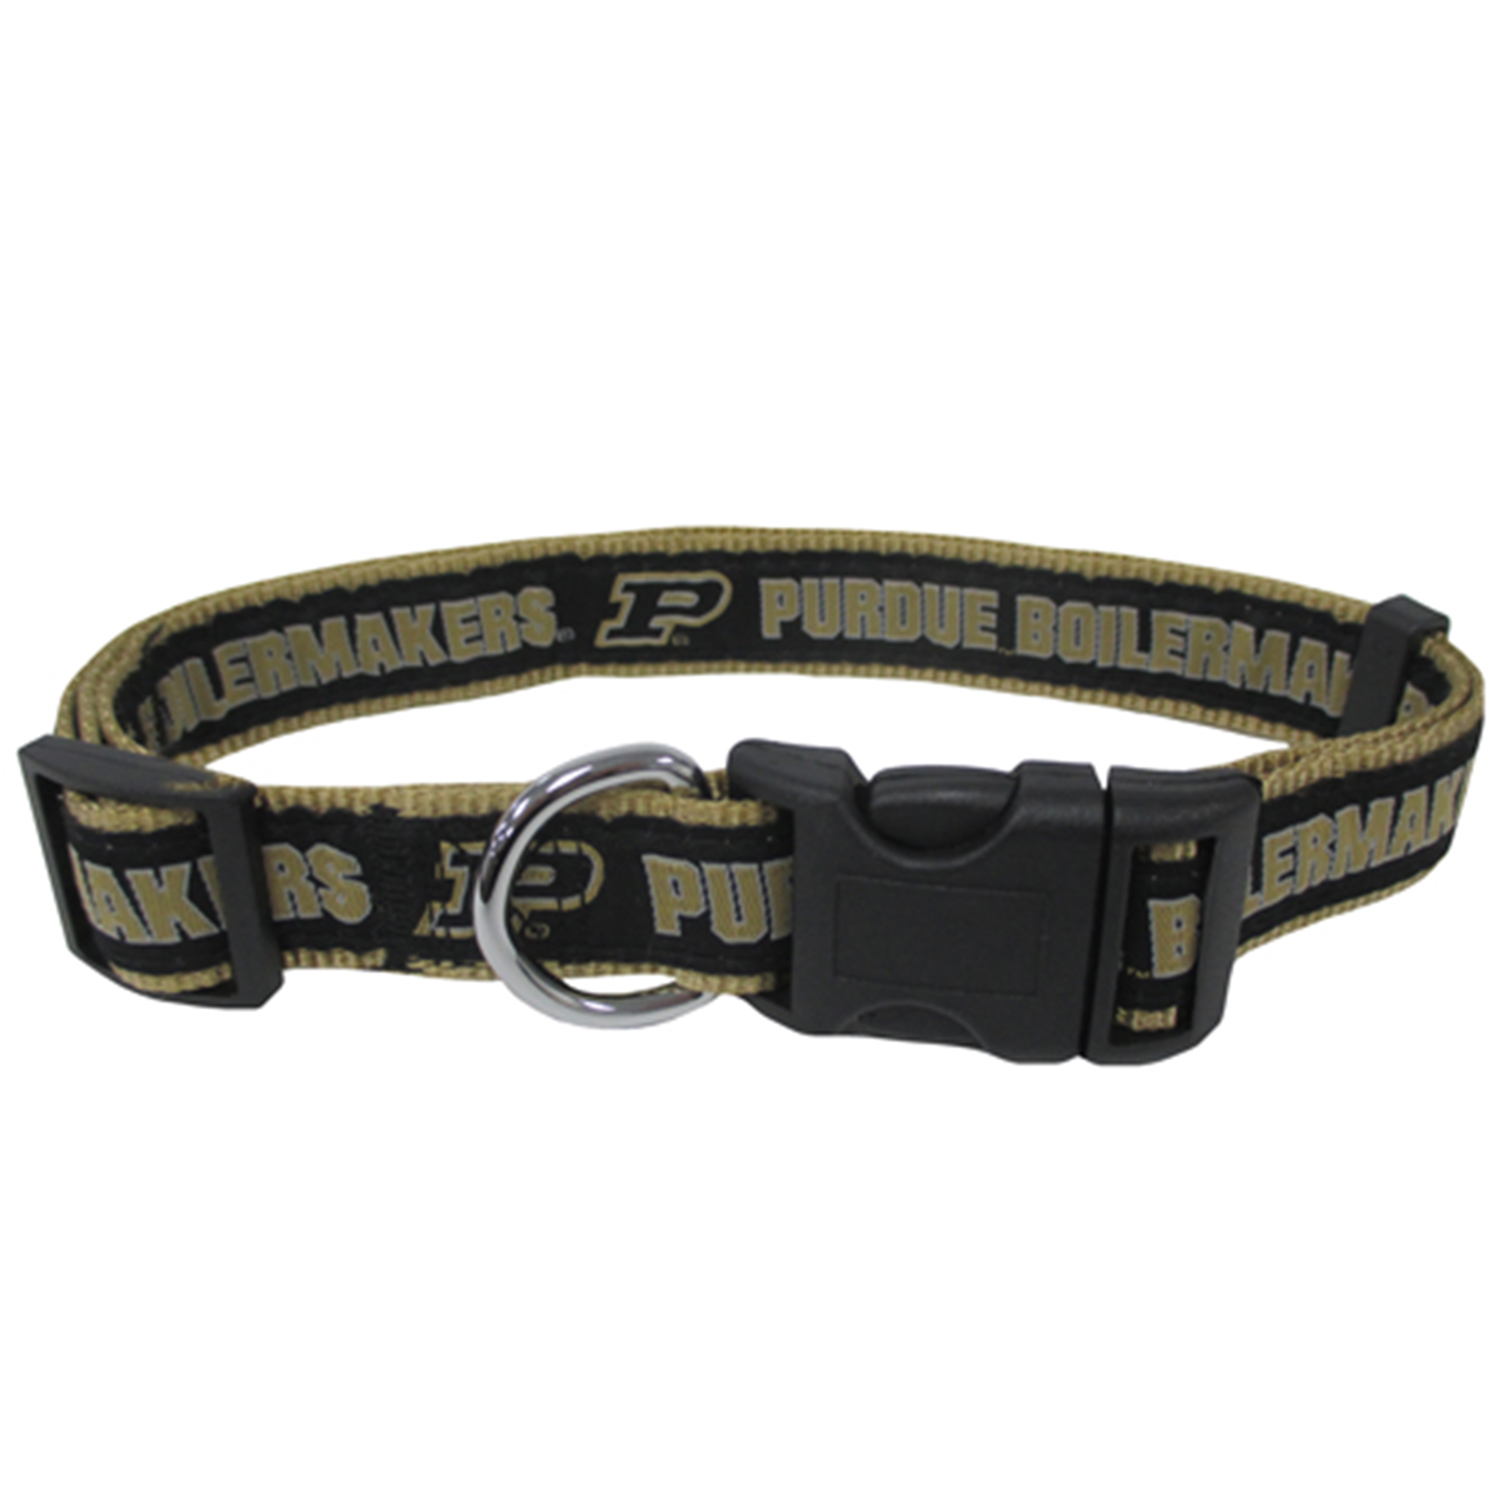 Pets First College Purdue Boilermakers Pet Collar, 3 Sizes Available, Sports Fan Dog Collar - Large - image 1 of 2